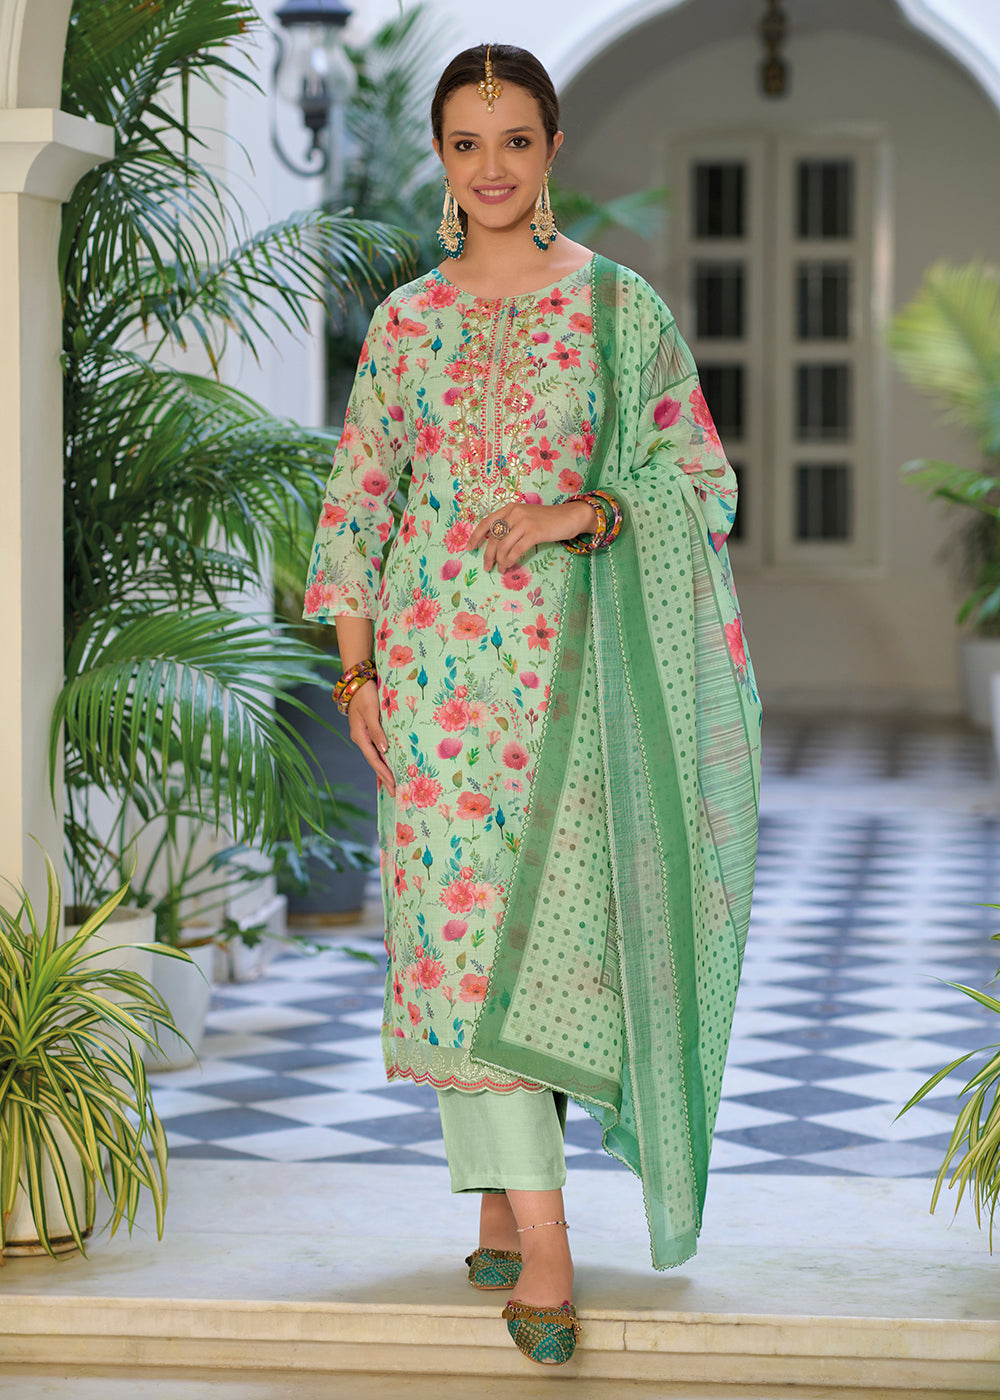 Buy Now Gota Patti Embroidered Green Lilen Ethnic Salwar Suit Online in USA, UK, Canada, Germany, Australia & Worldwide at Empress Clothing.